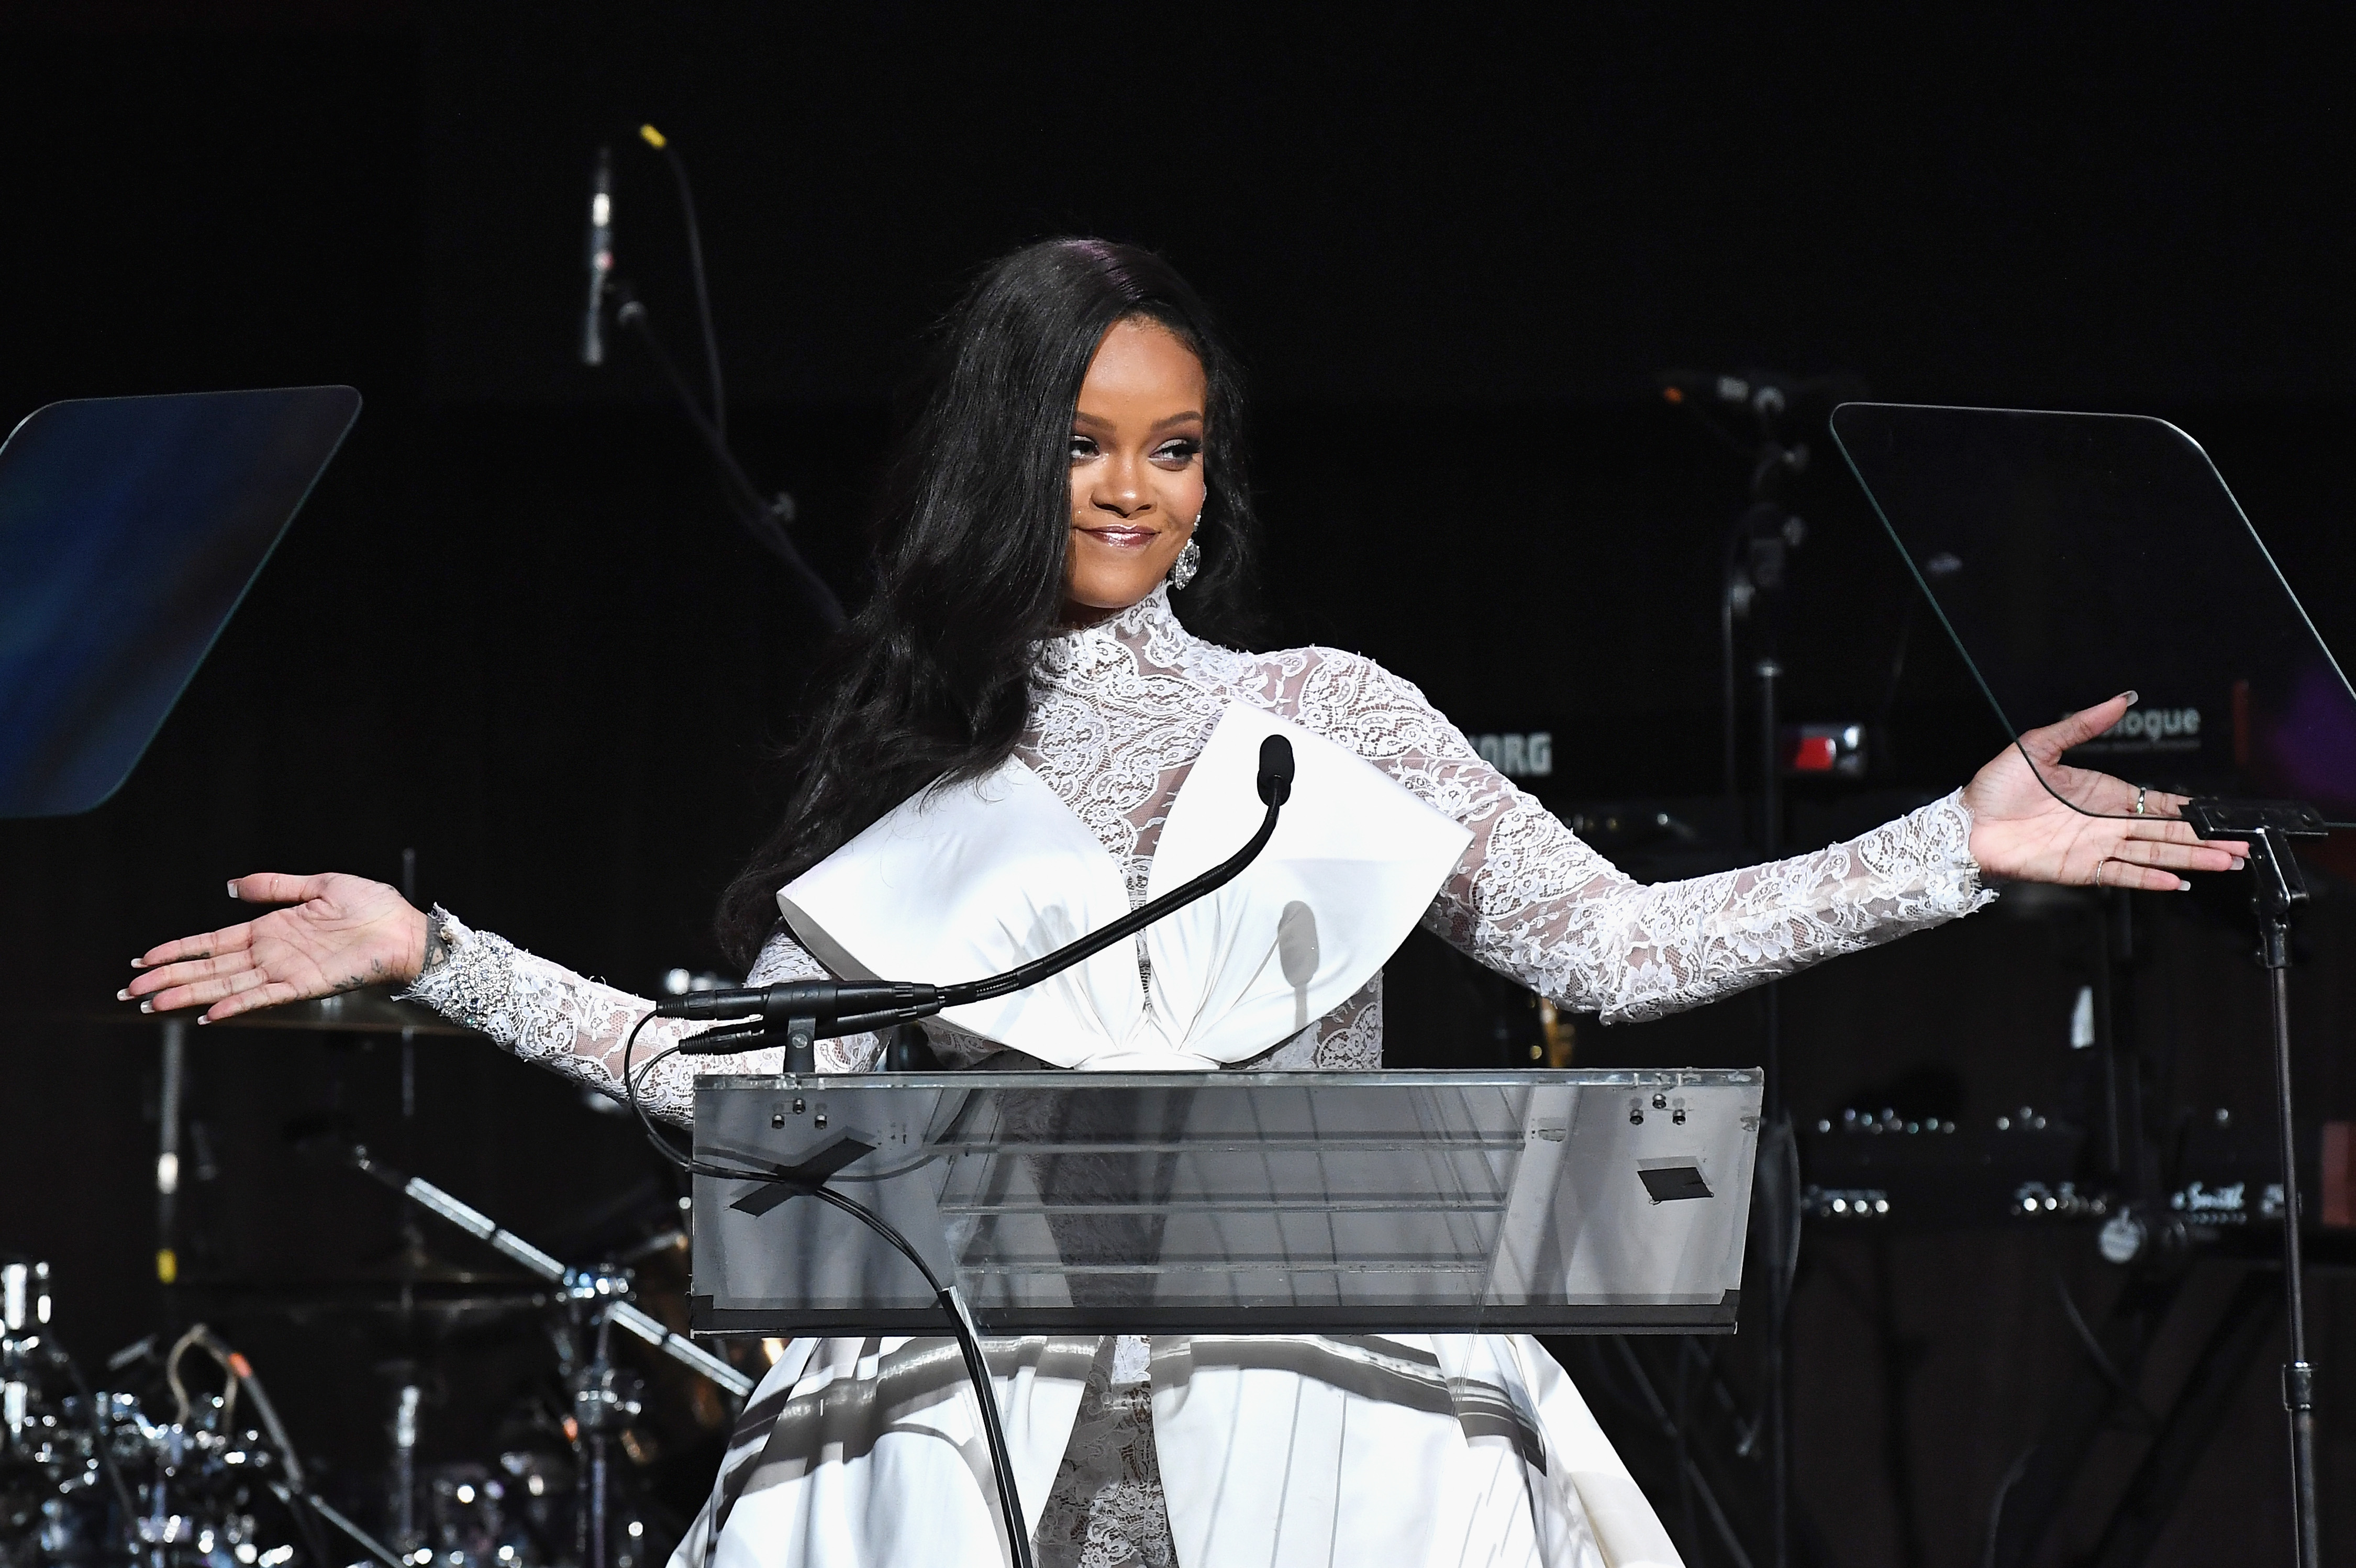 NEW YORK, NY - SEPTEMBER 13:  Rihanna speaks onstage during Rihanna's 4th Annual Diamond Ball benefitting The Clara Lionel Foundation at Cipriani Wall Street on September 13, 2018 in New York City.  (Photo by Dimitrios Kambouris/Getty Images for Diamond Ball) (Dimitrios Kambouris—Getty Images for Diamond Ball)